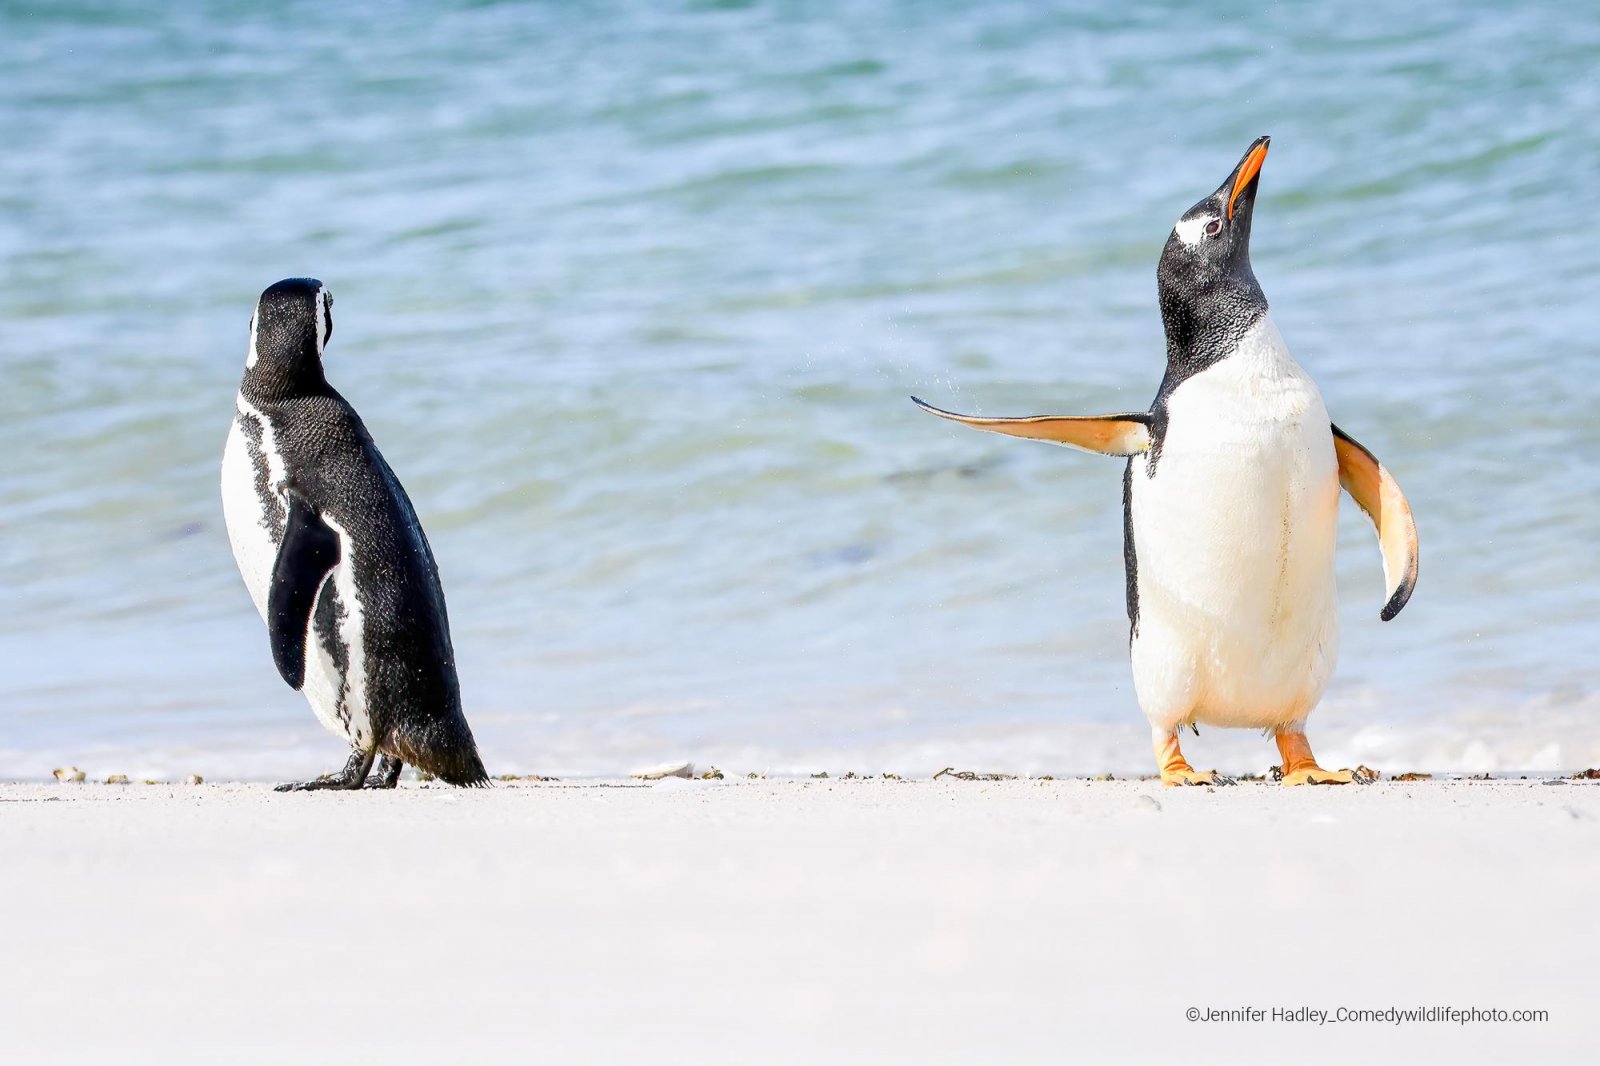 Two gentoo penguins hanging out on the beach. One has its fin outstretched while the other looks away.